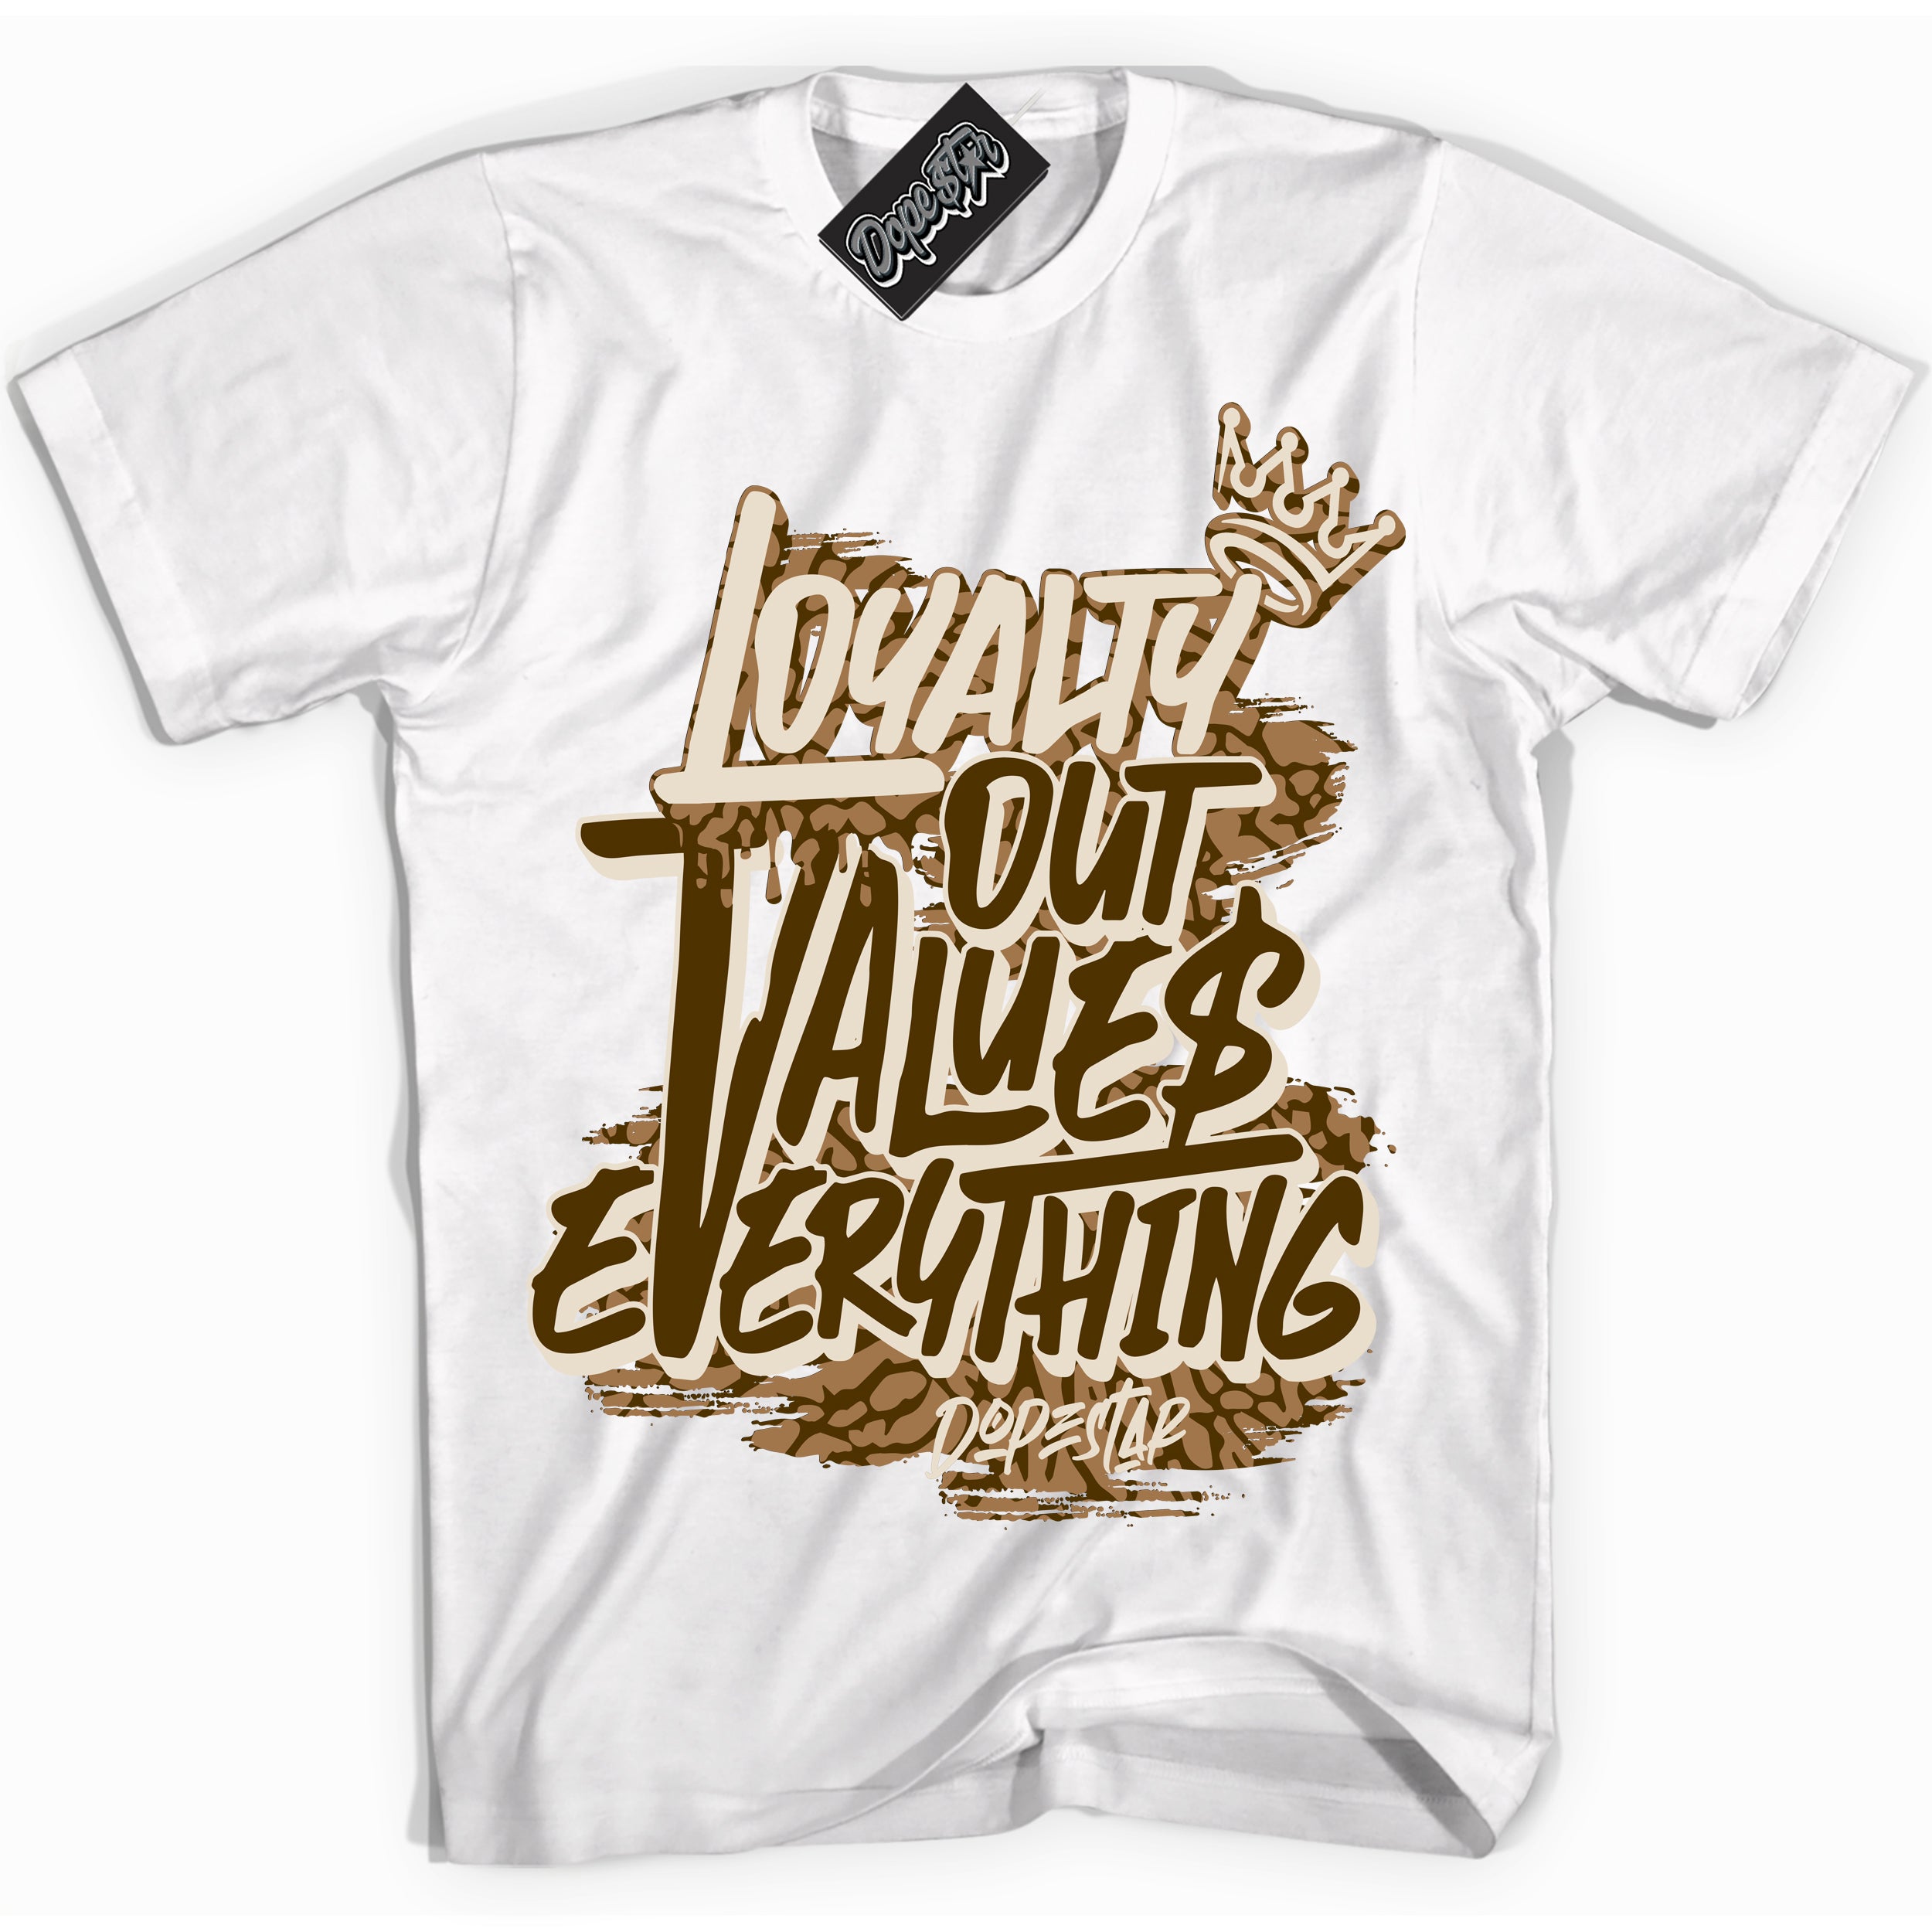 Cool White Shirt with “ Loyalty Out Values Everything” design that perfectly matches Palomino 3s Sneakers.